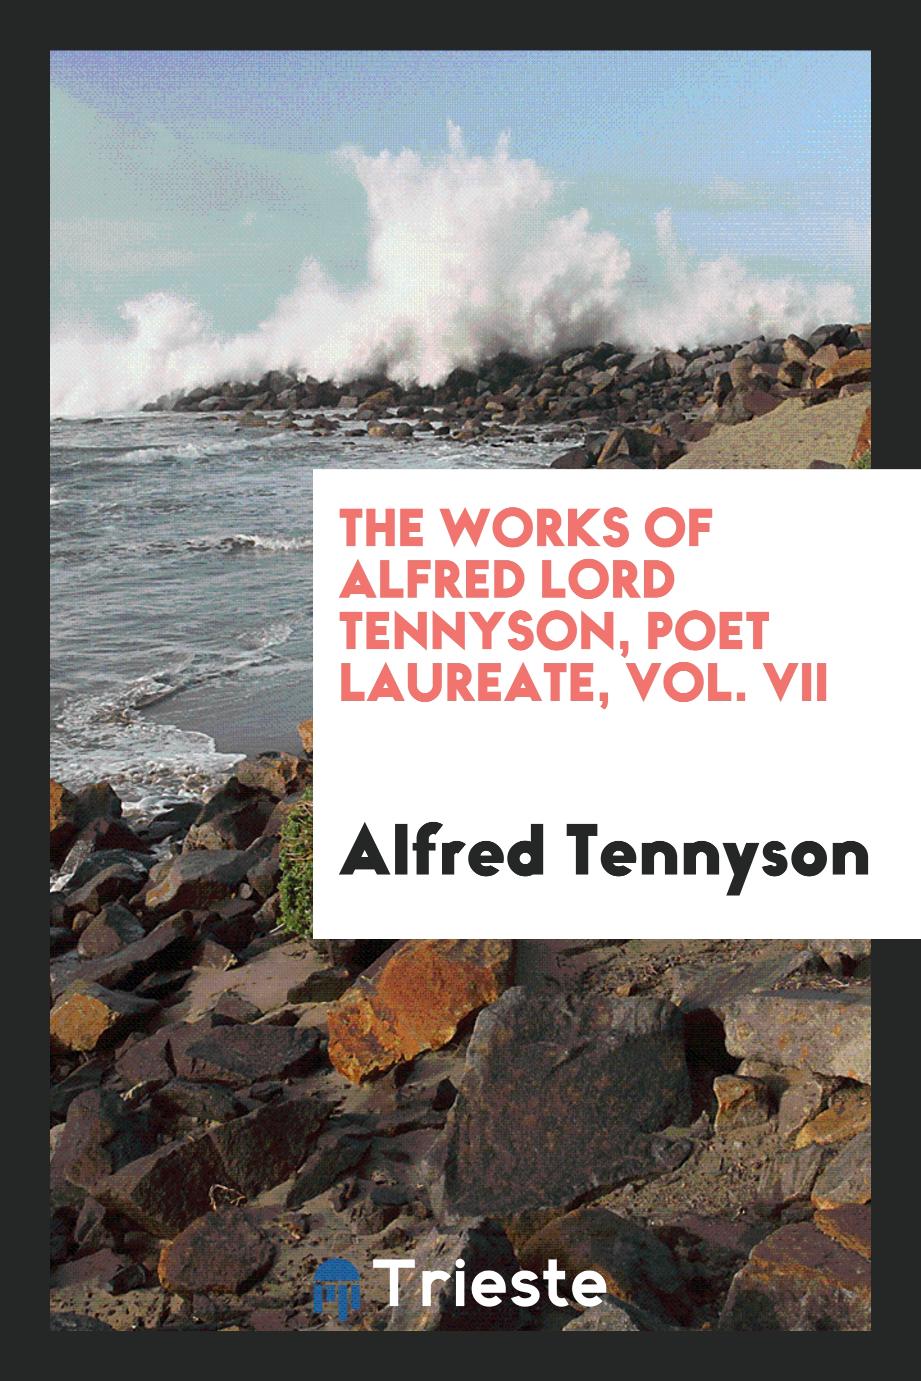 The Works of Alfred Lord Tennyson, Poet Laureate, Vol. VII